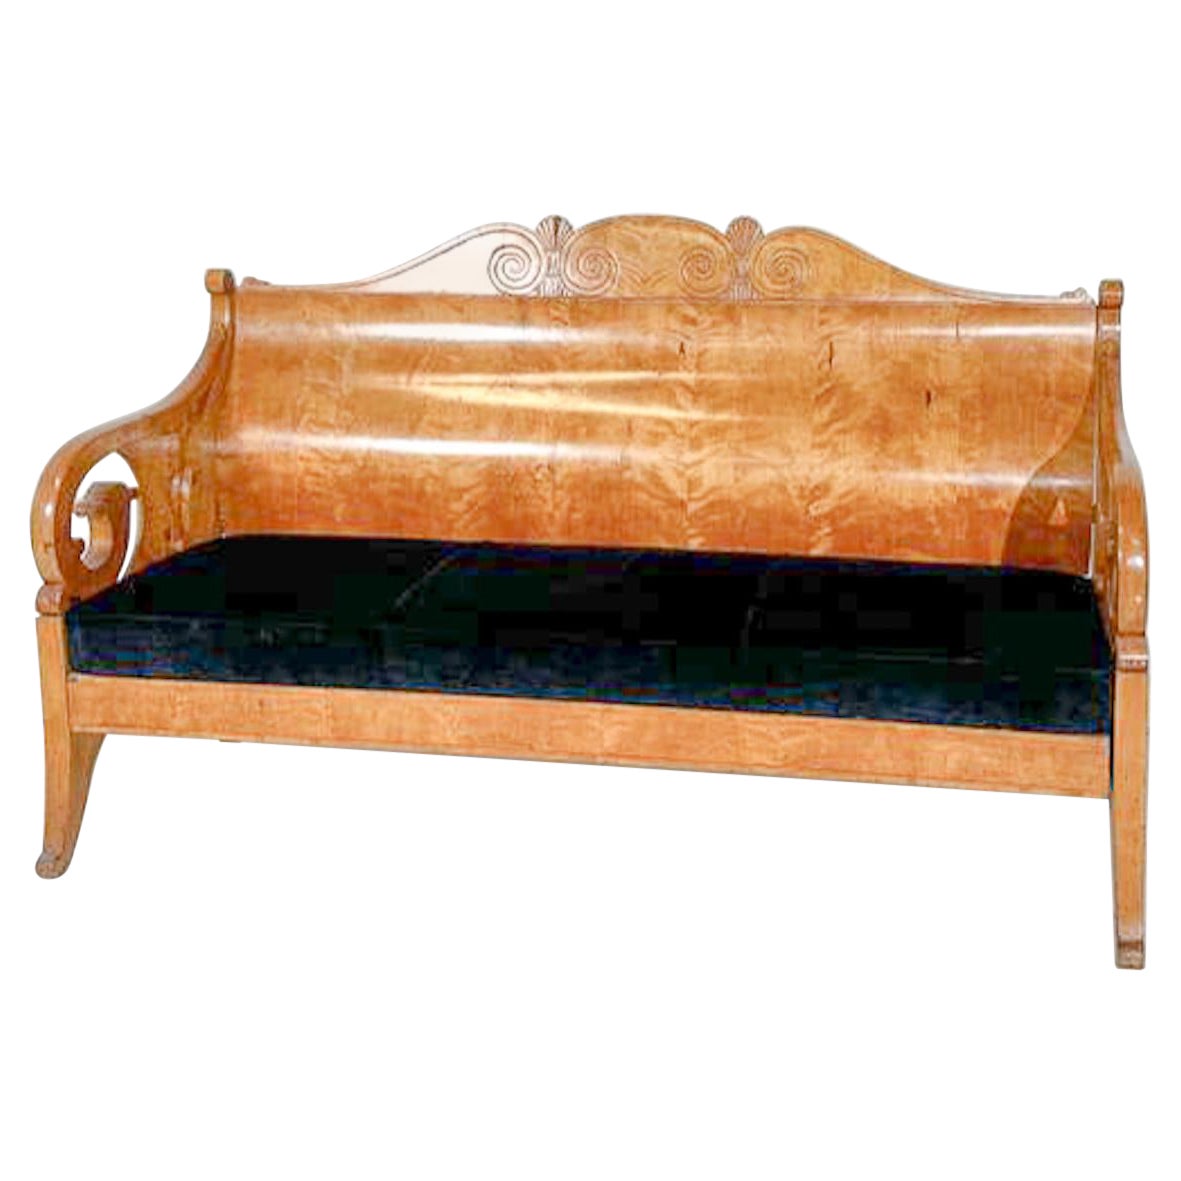 Bench in Birch Veneer, Russia, Early 19th Century For Sale